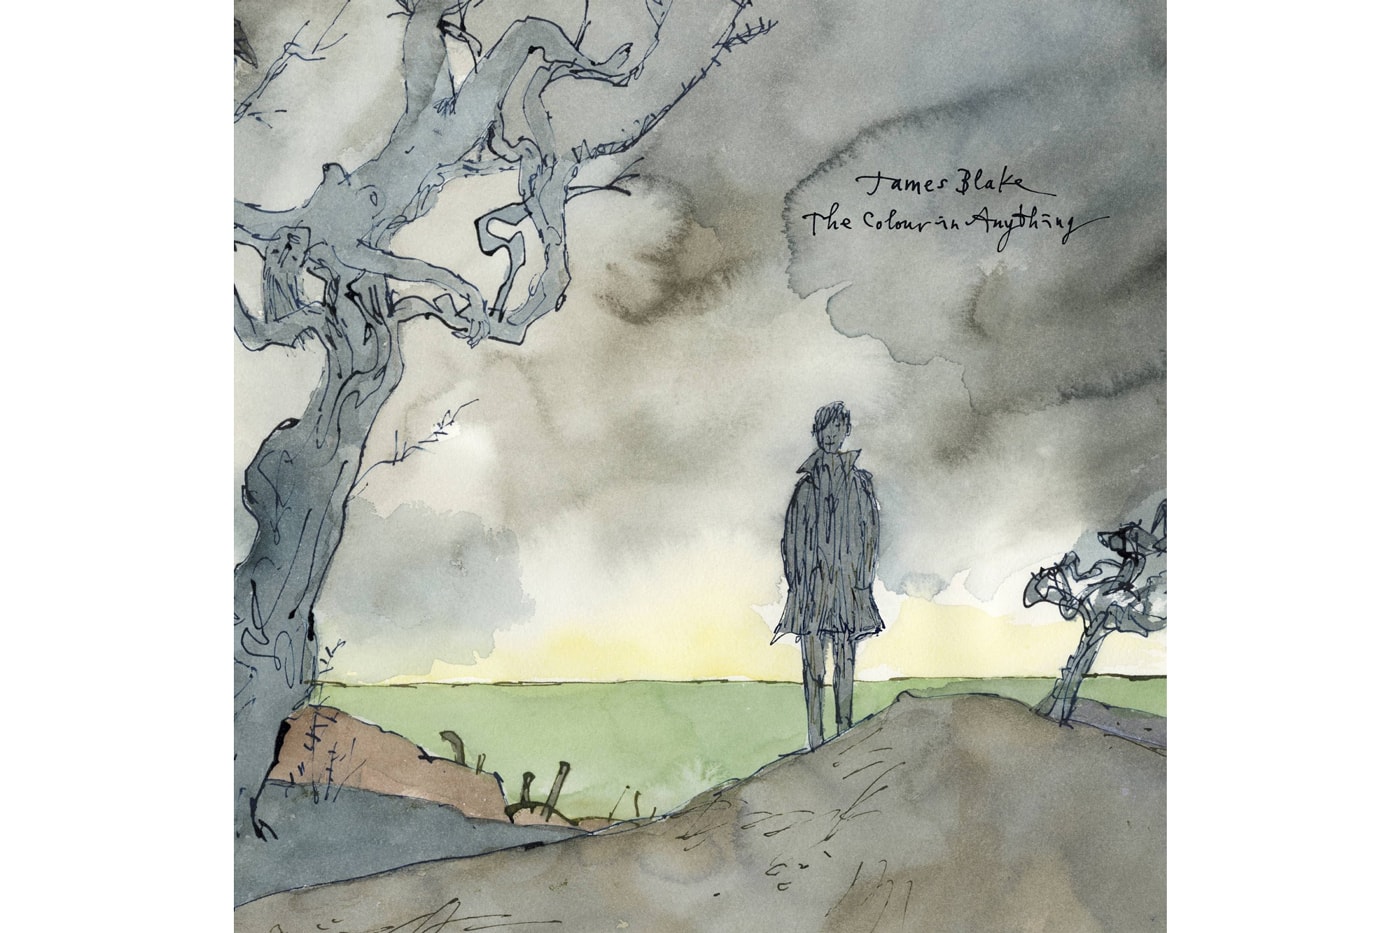 james-blake-the-colour-in-anything-album-stream-2